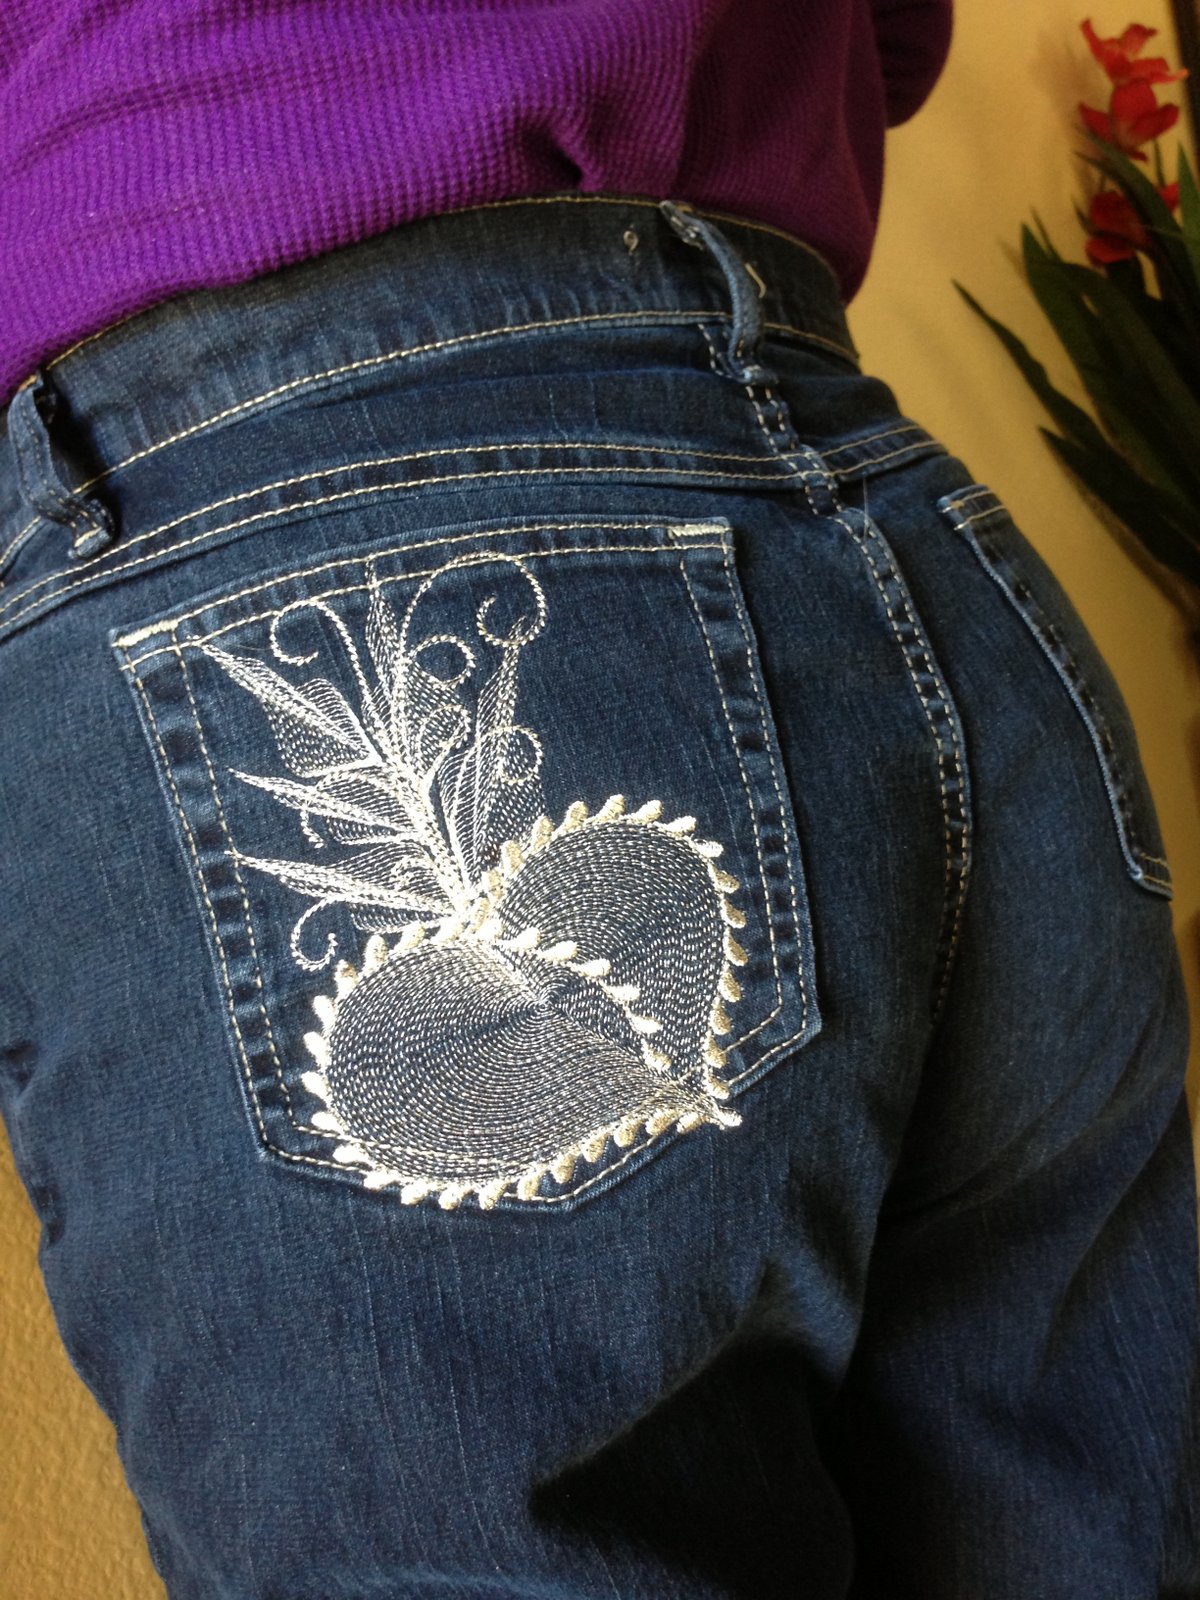 Embroidery On Jeans Diy | Embroidery Shops